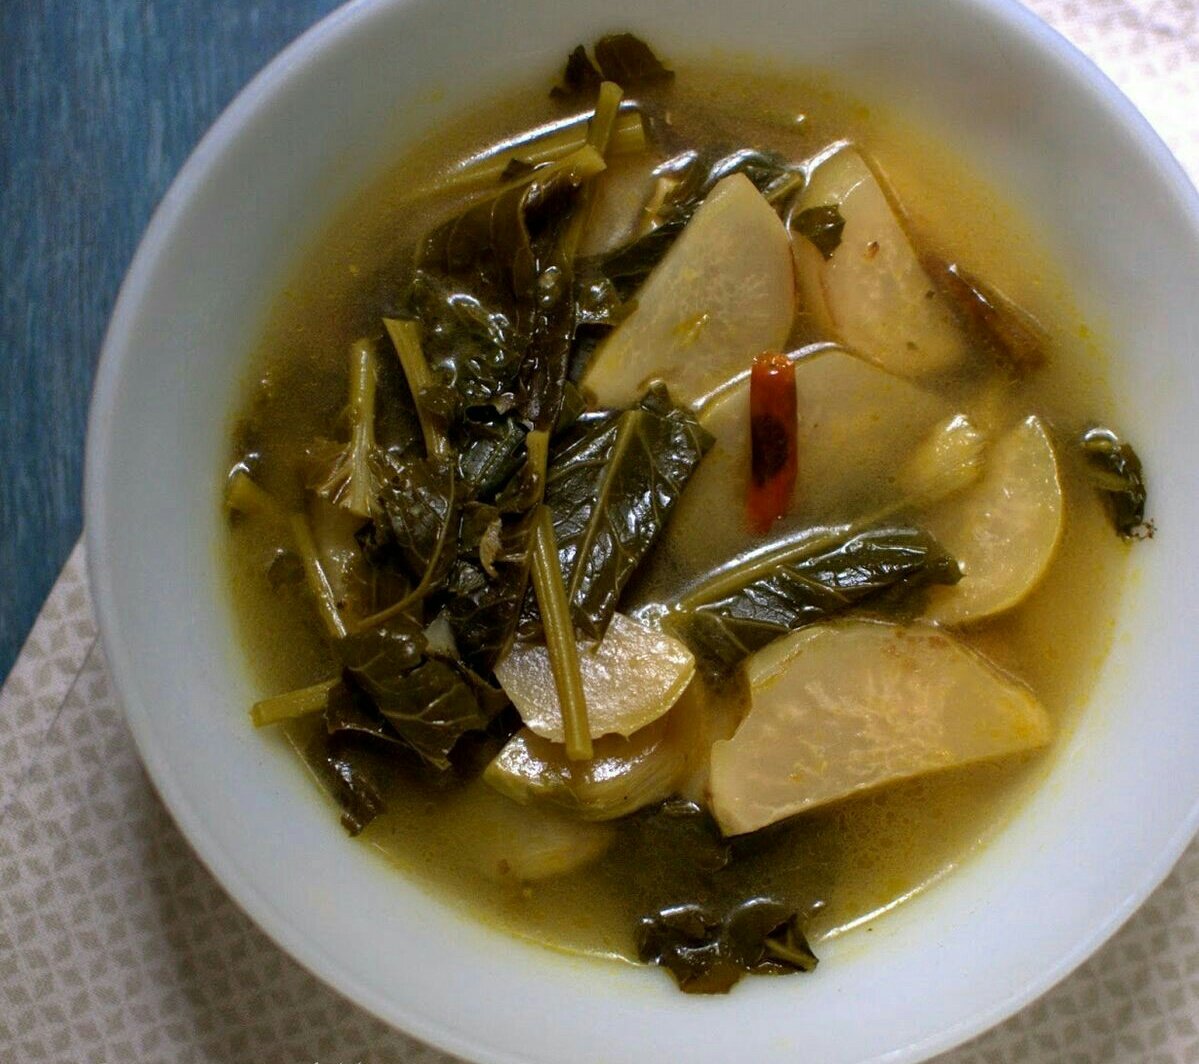 Jung Hoseok as 'monj haak'Monj haak is a curry made with kohlrabi. It is also known as 'knol khol' or 'ganth gobhi' and is the most widely used vegetable in Kashmiri cuisine after lotus stem. #MTVHottest BTS  @BTS_twt